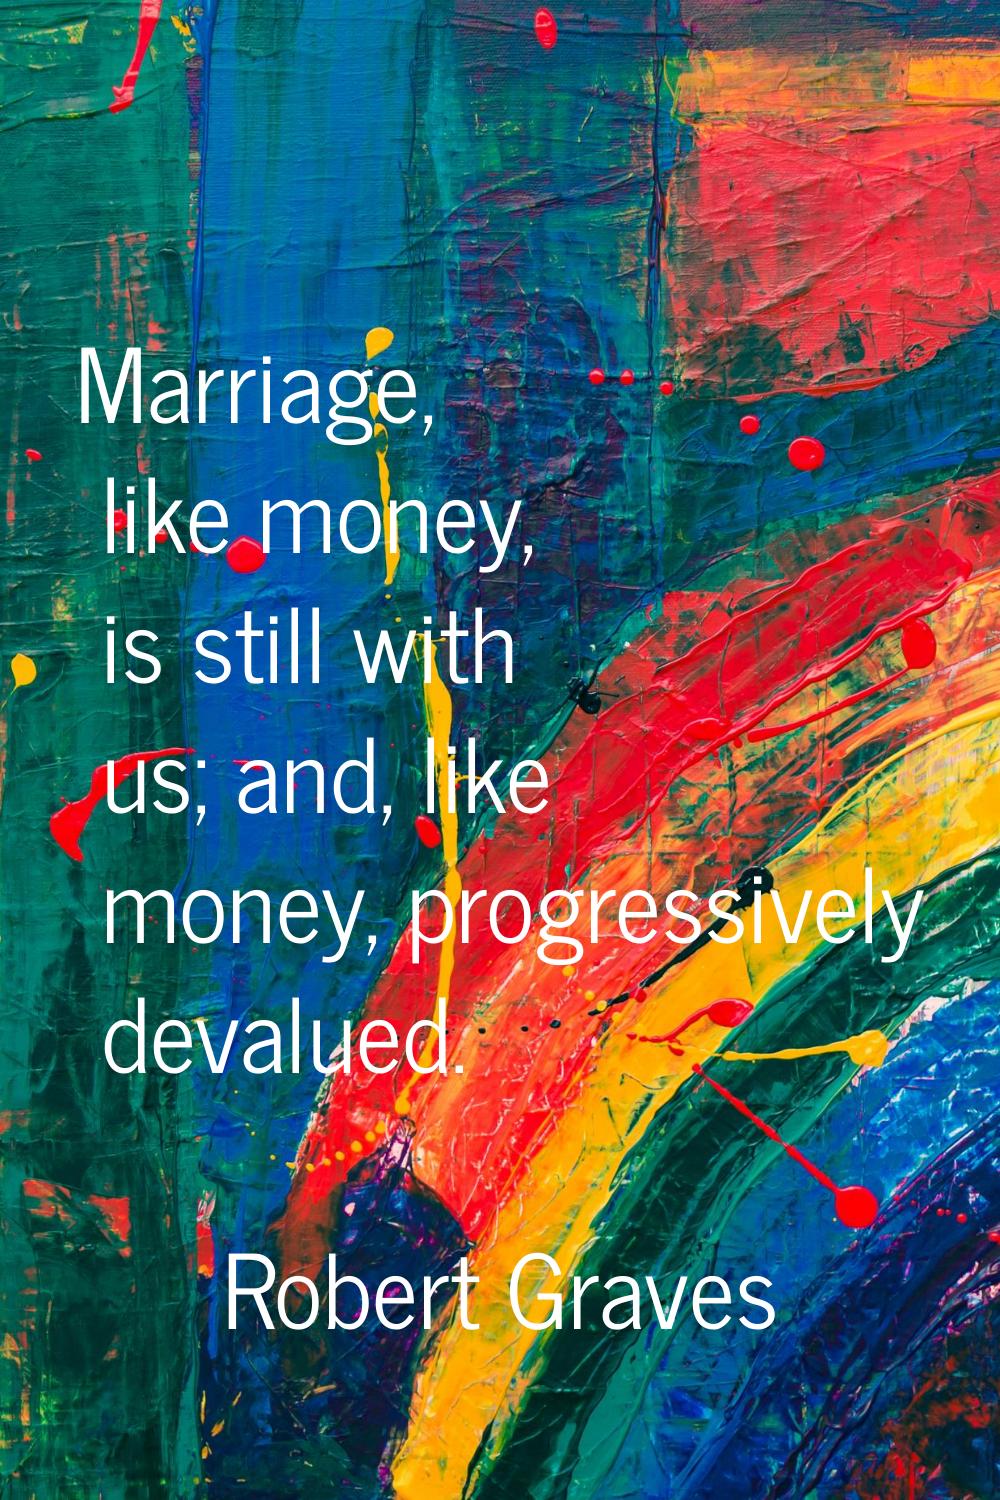 Marriage, like money, is still with us; and, like money, progressively devalued.